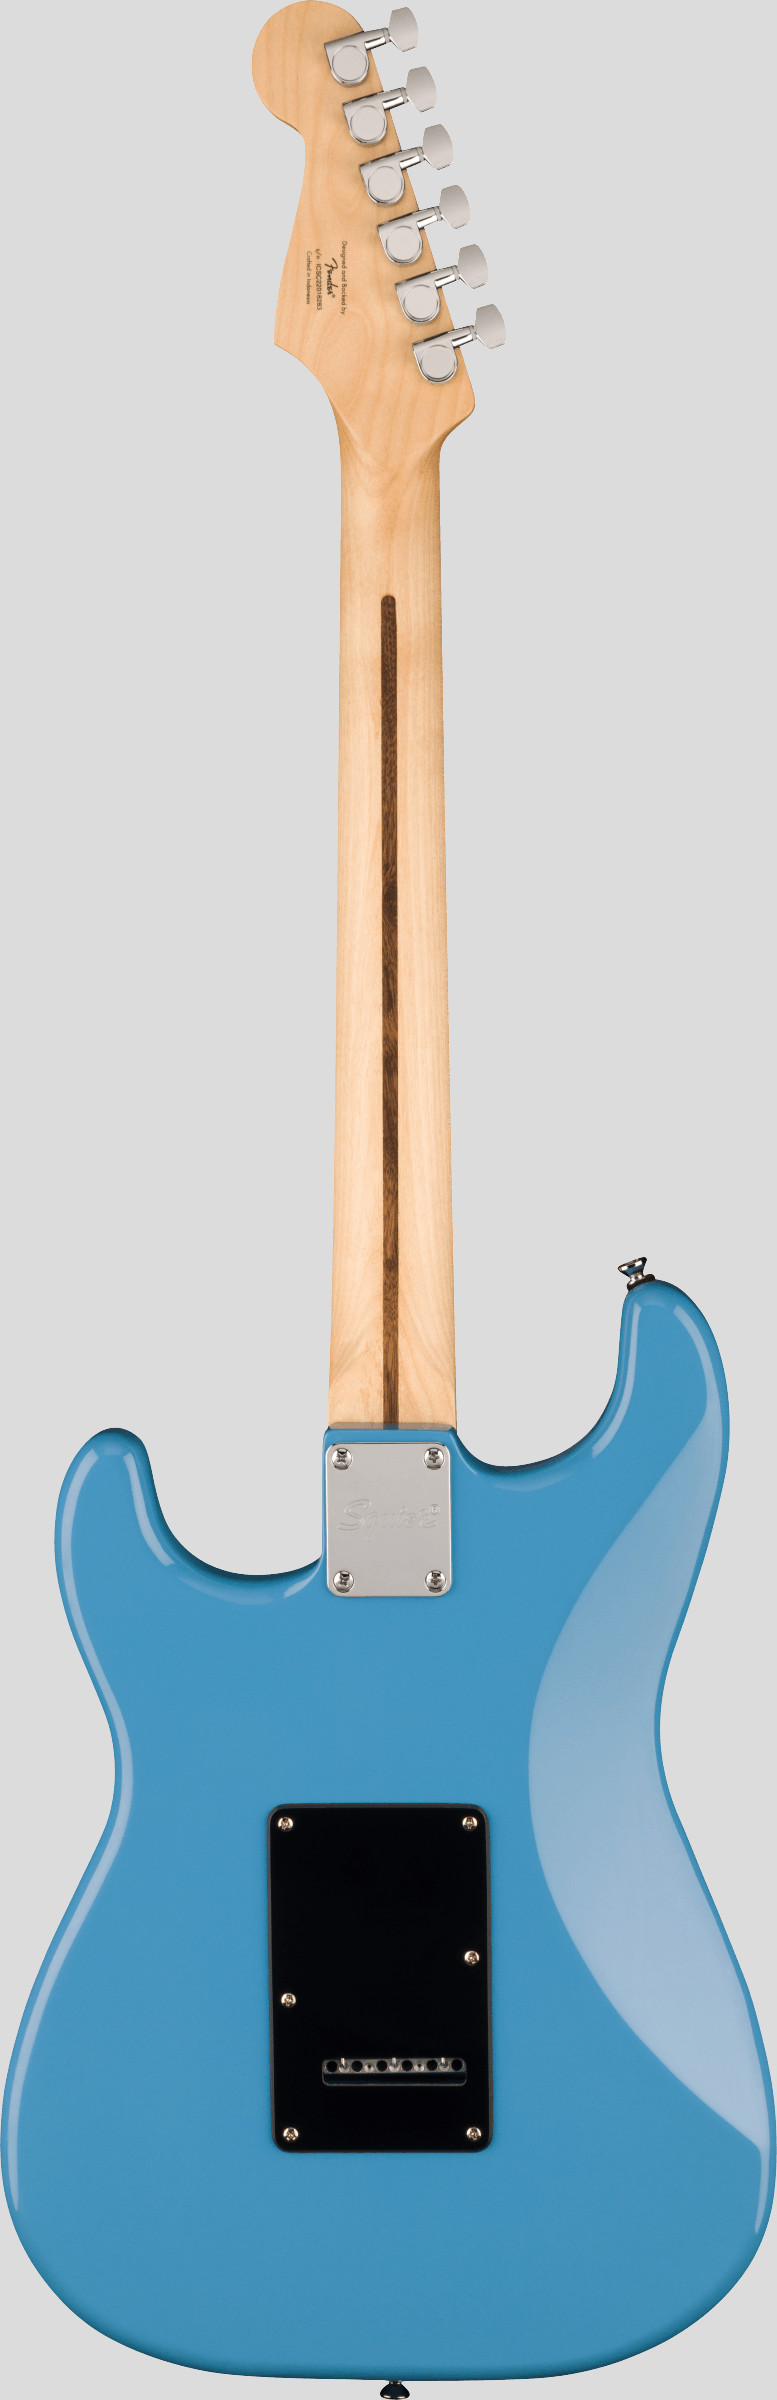 Squier by Fender Sonic Stratocaster California Blue 2